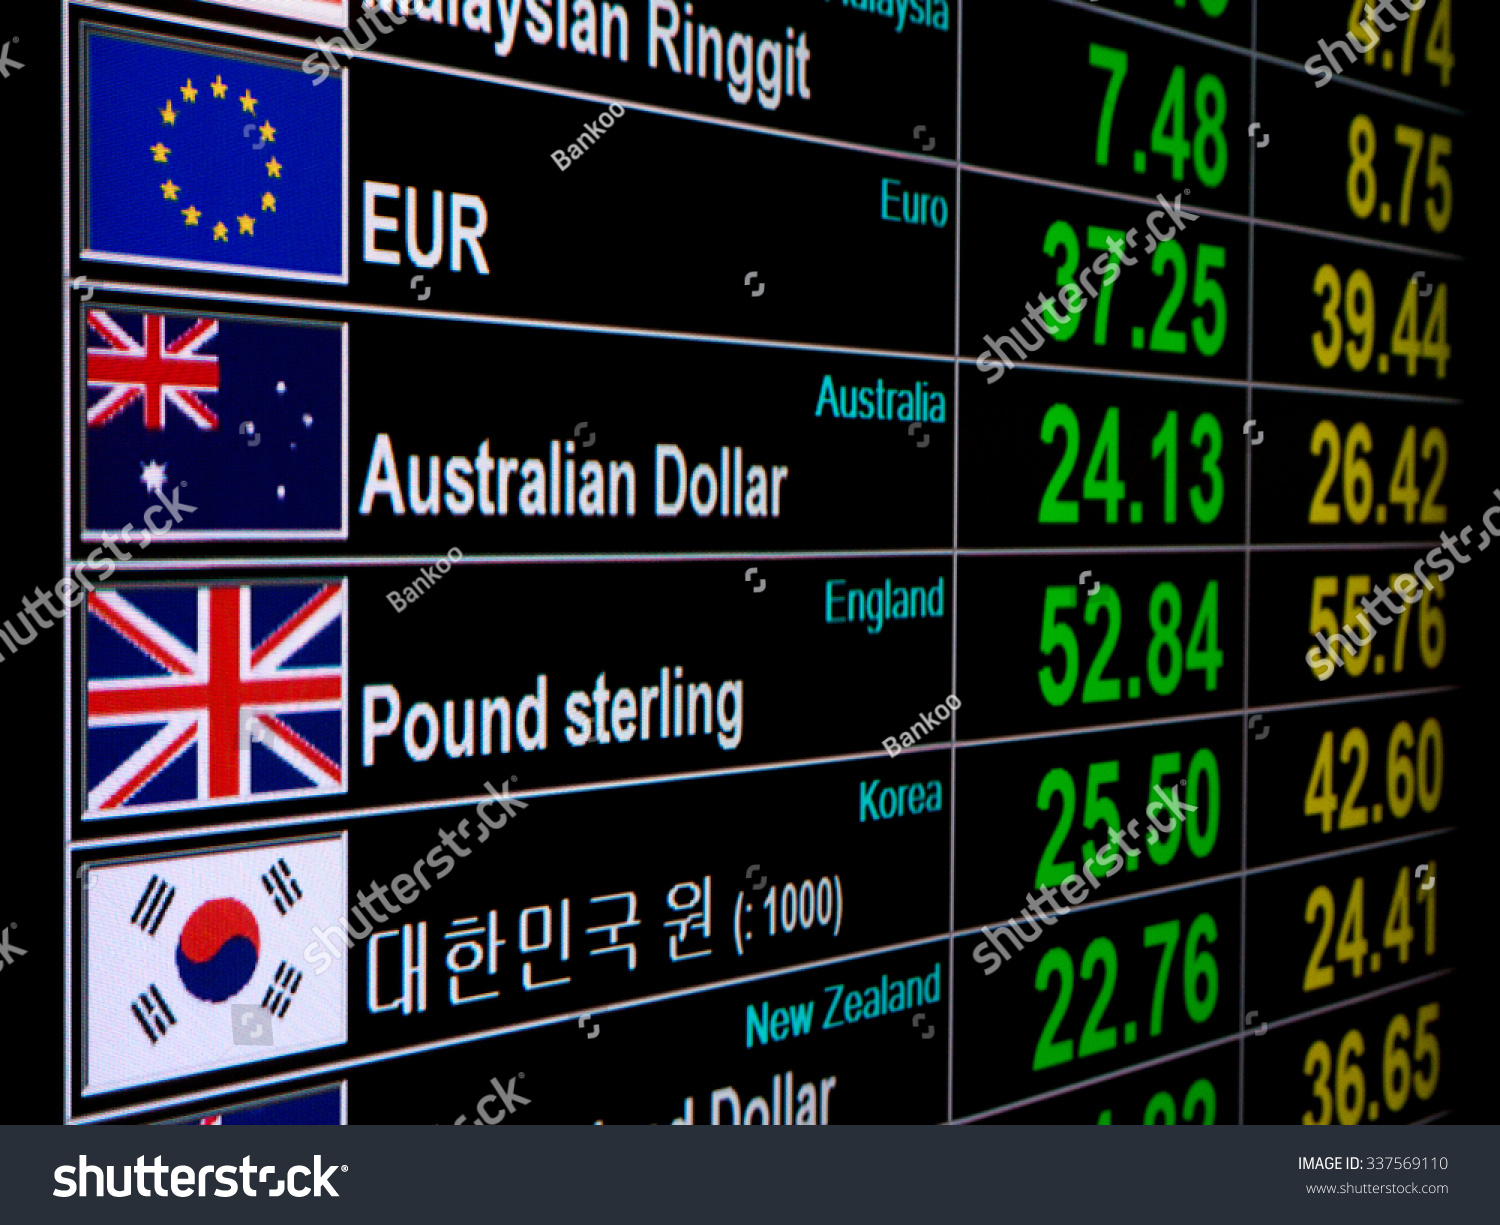 Currency Exchange Rate On Digital Led Display Board Stock ...